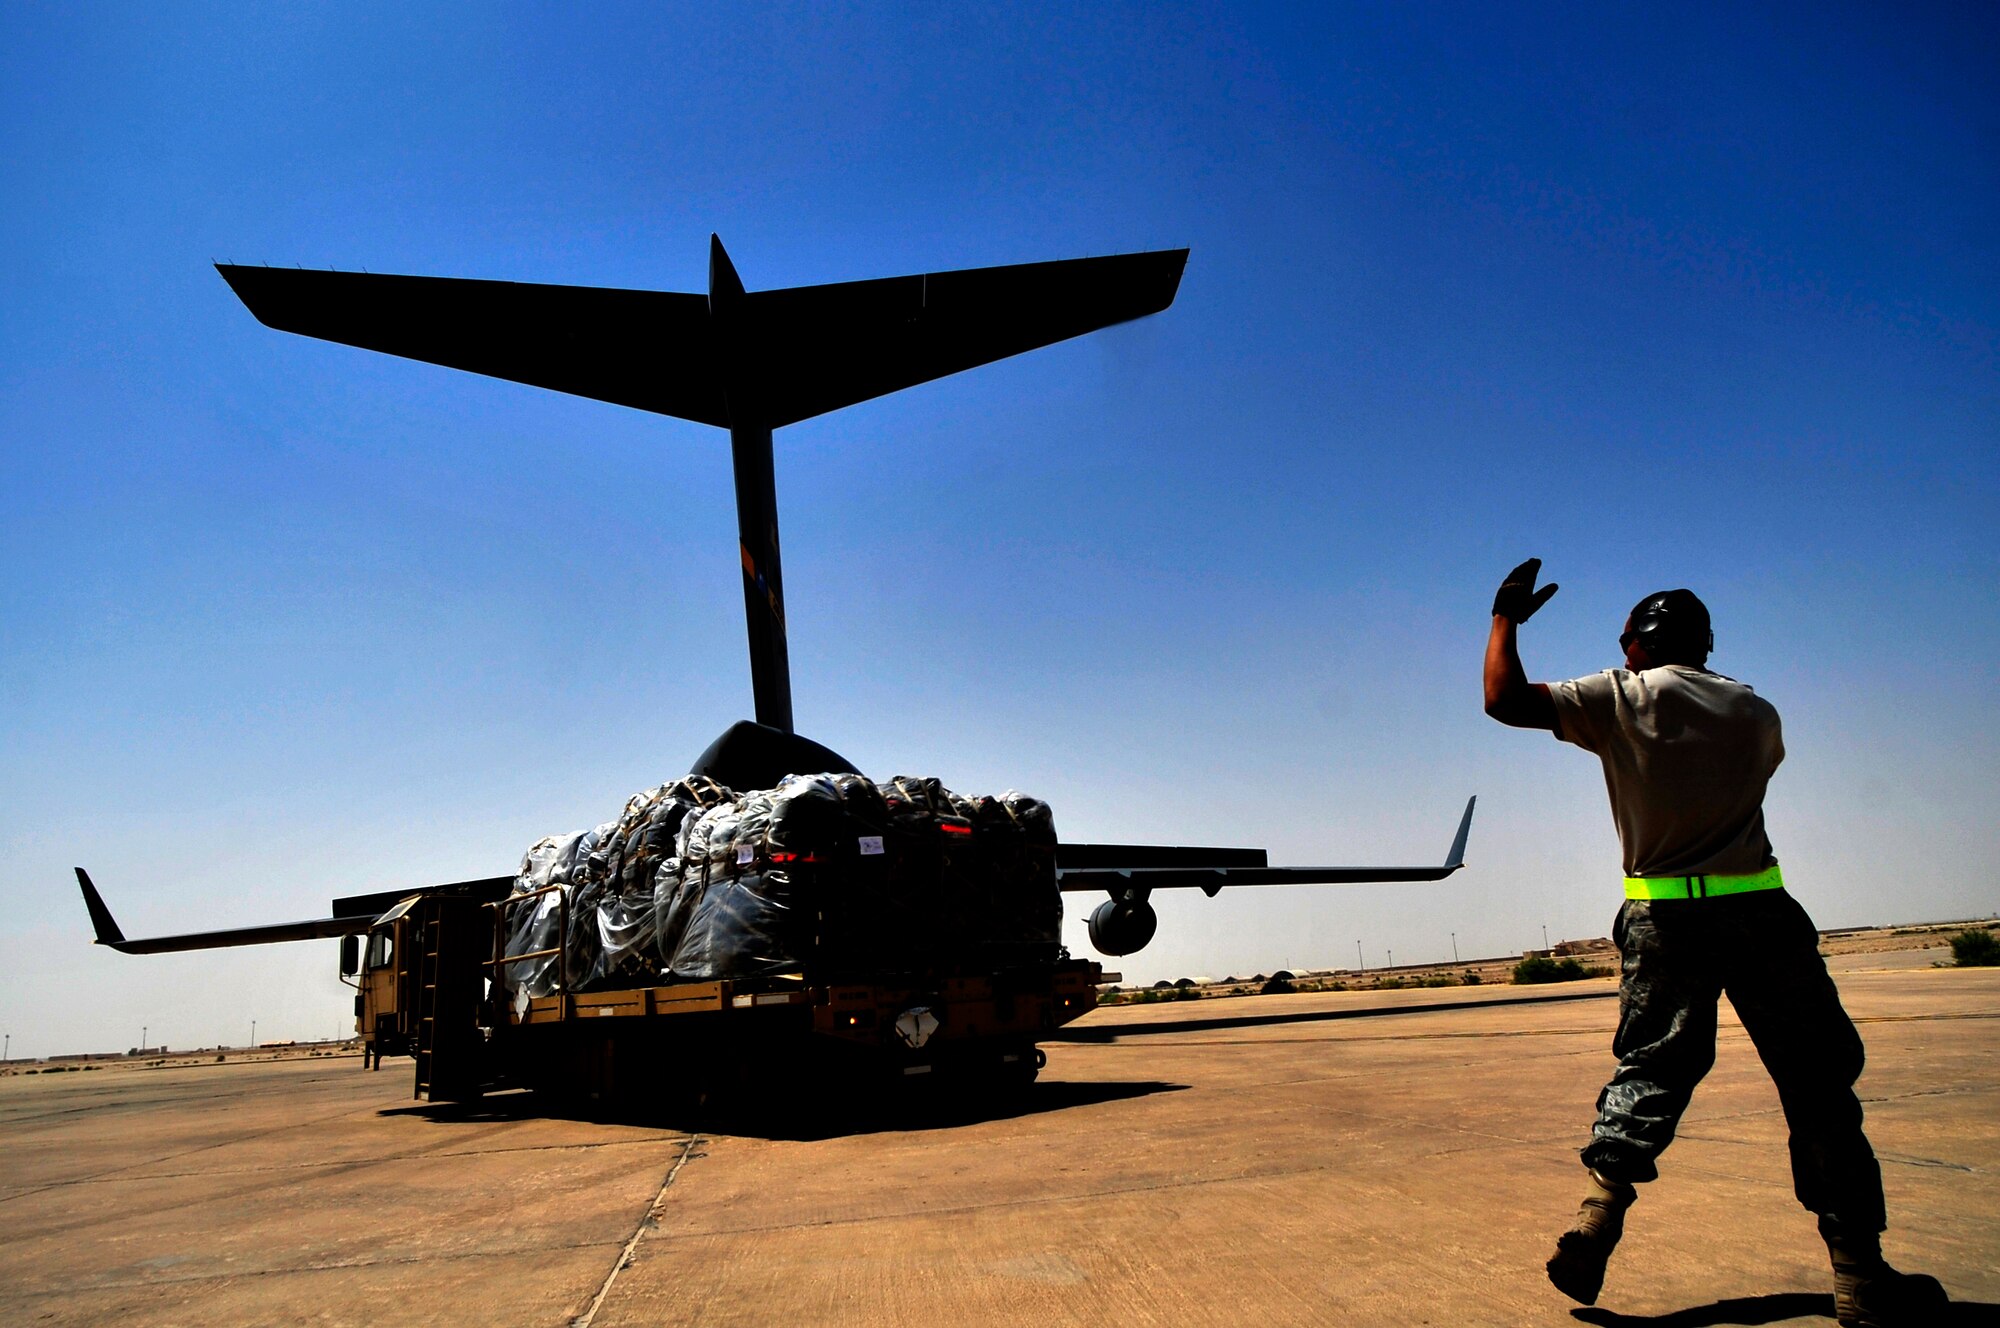 An aerial porter marshals a K-Loader vehicle with cargo from a C-17 Globemaster III transport aircraft at Ail Base, Iraq on Aug. 26, 2011.  The terminal is the southern aerial hub of Iraq.  It processes approximately 5,000 passengers and 850,000 pounds of cargo each month. (U.S. Air Force photo/Master Sgt. Cecilio Ricardo) 